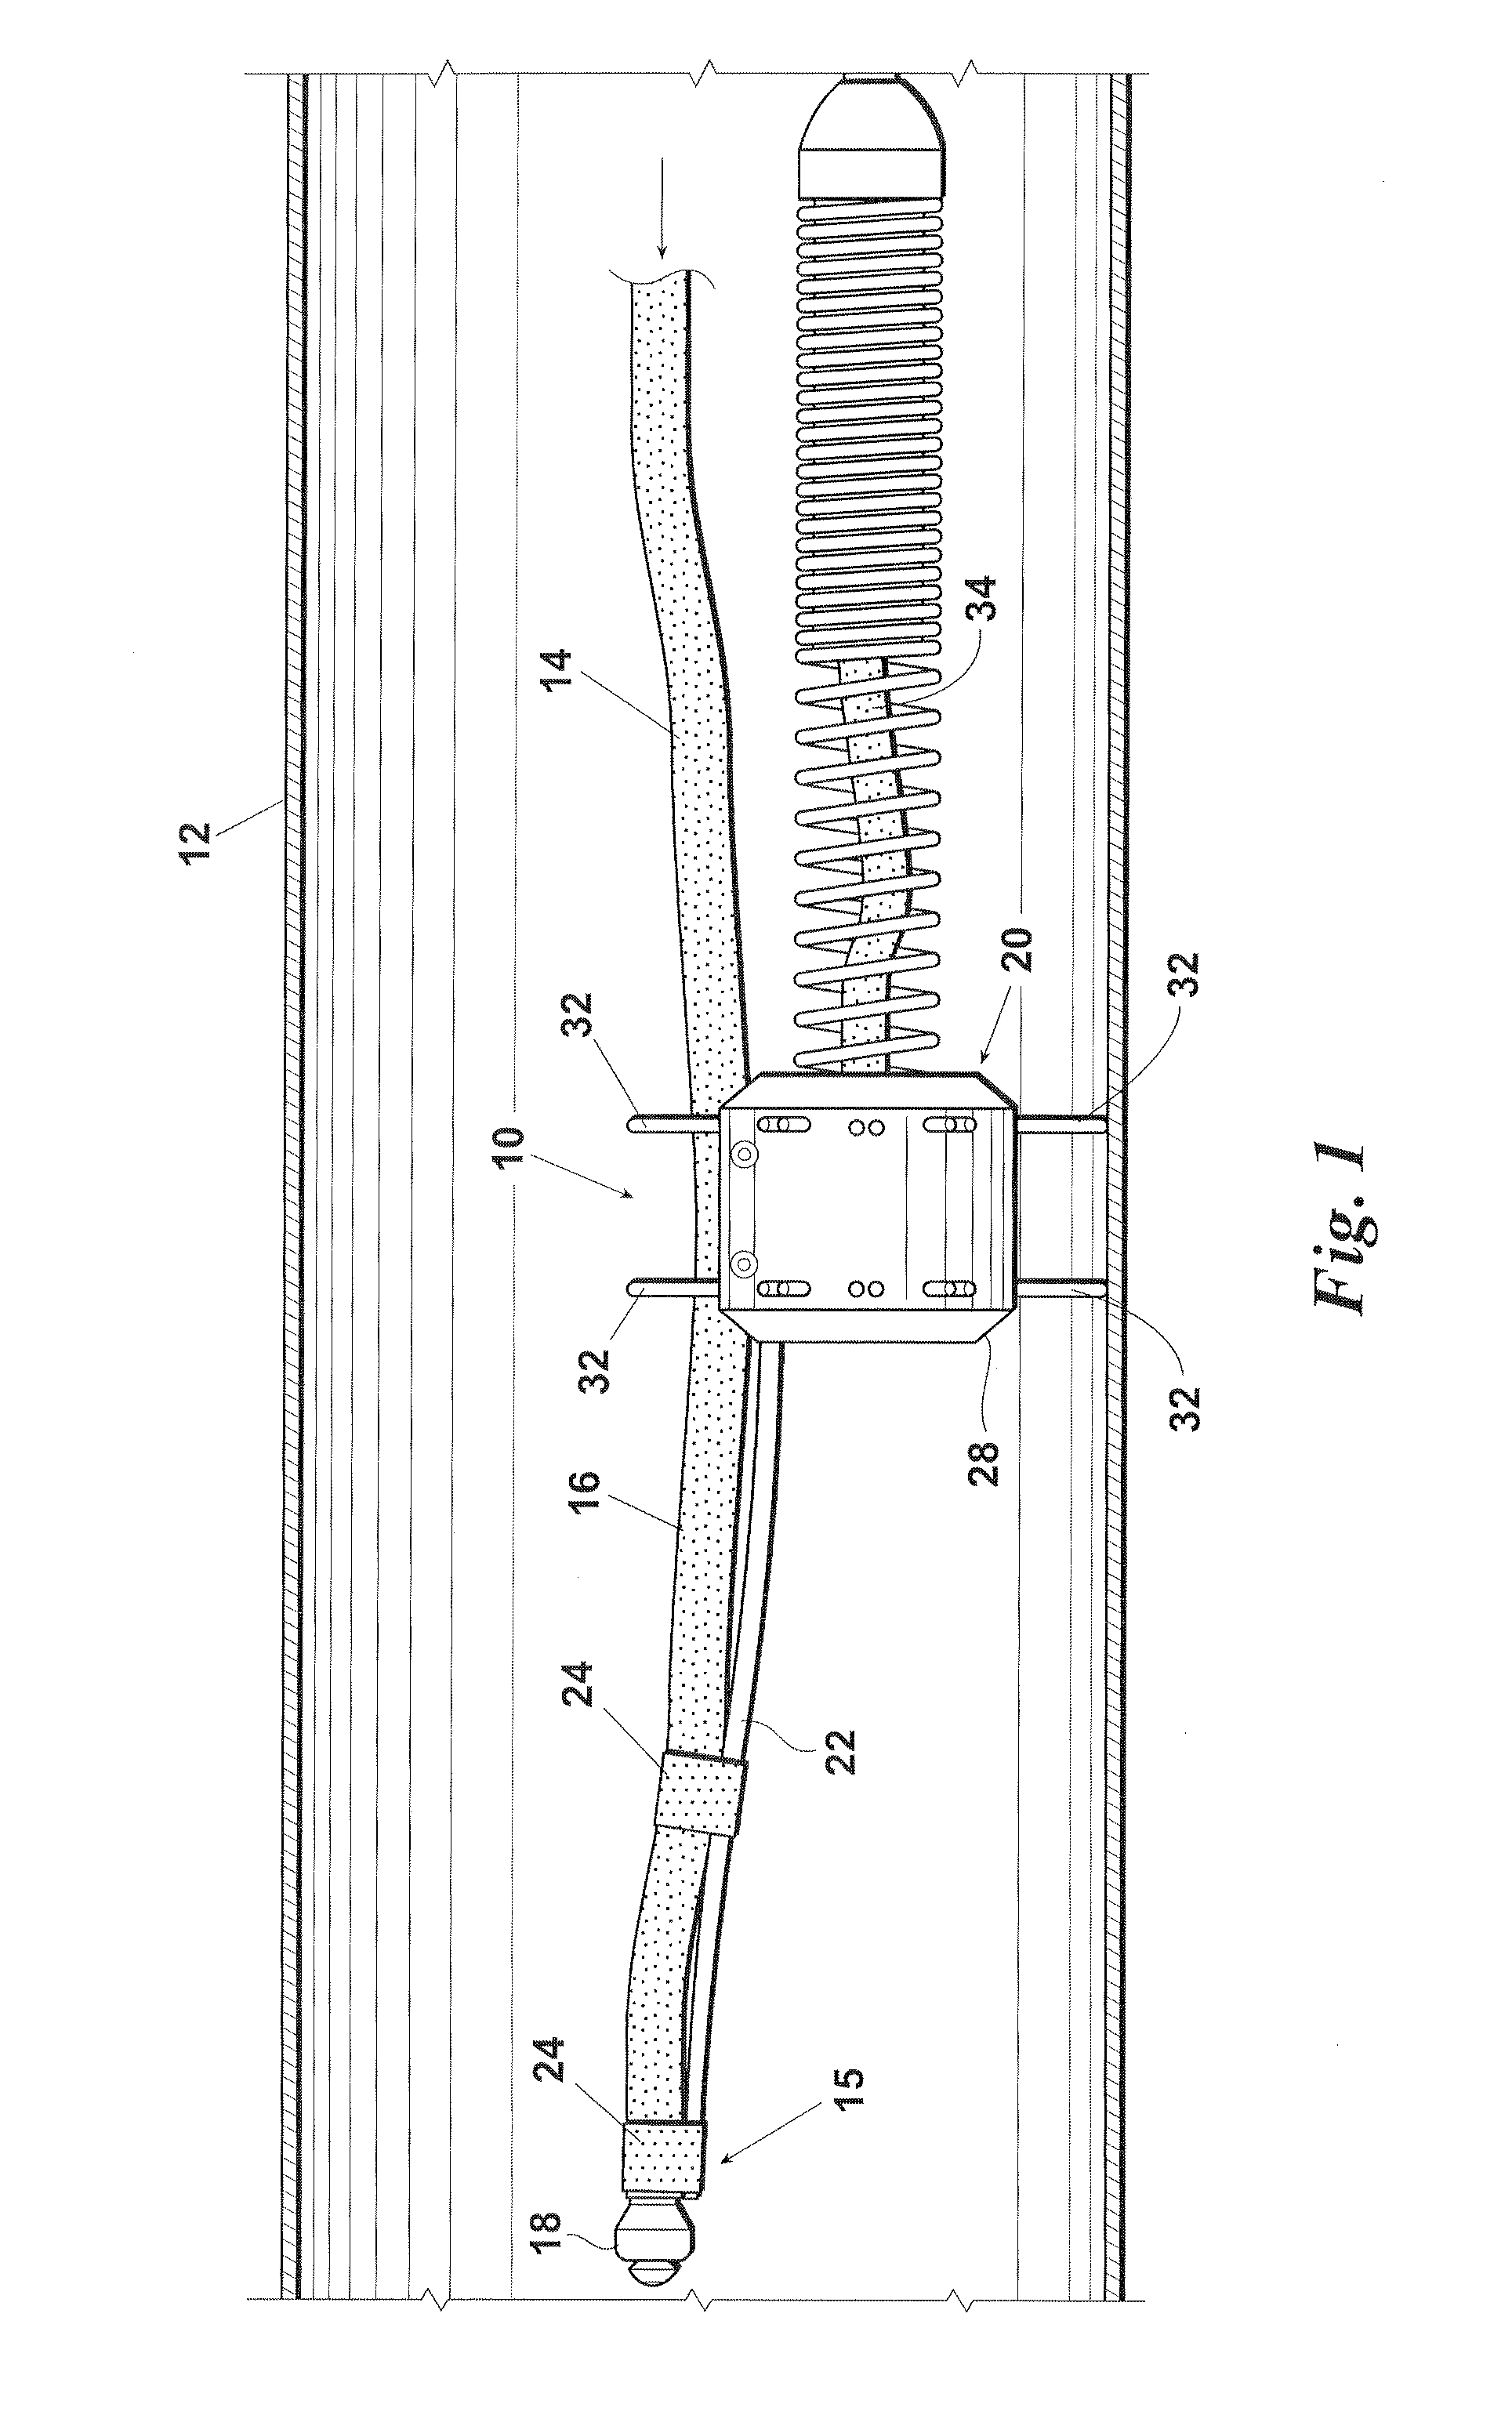 Method and apparatus for coating ducts